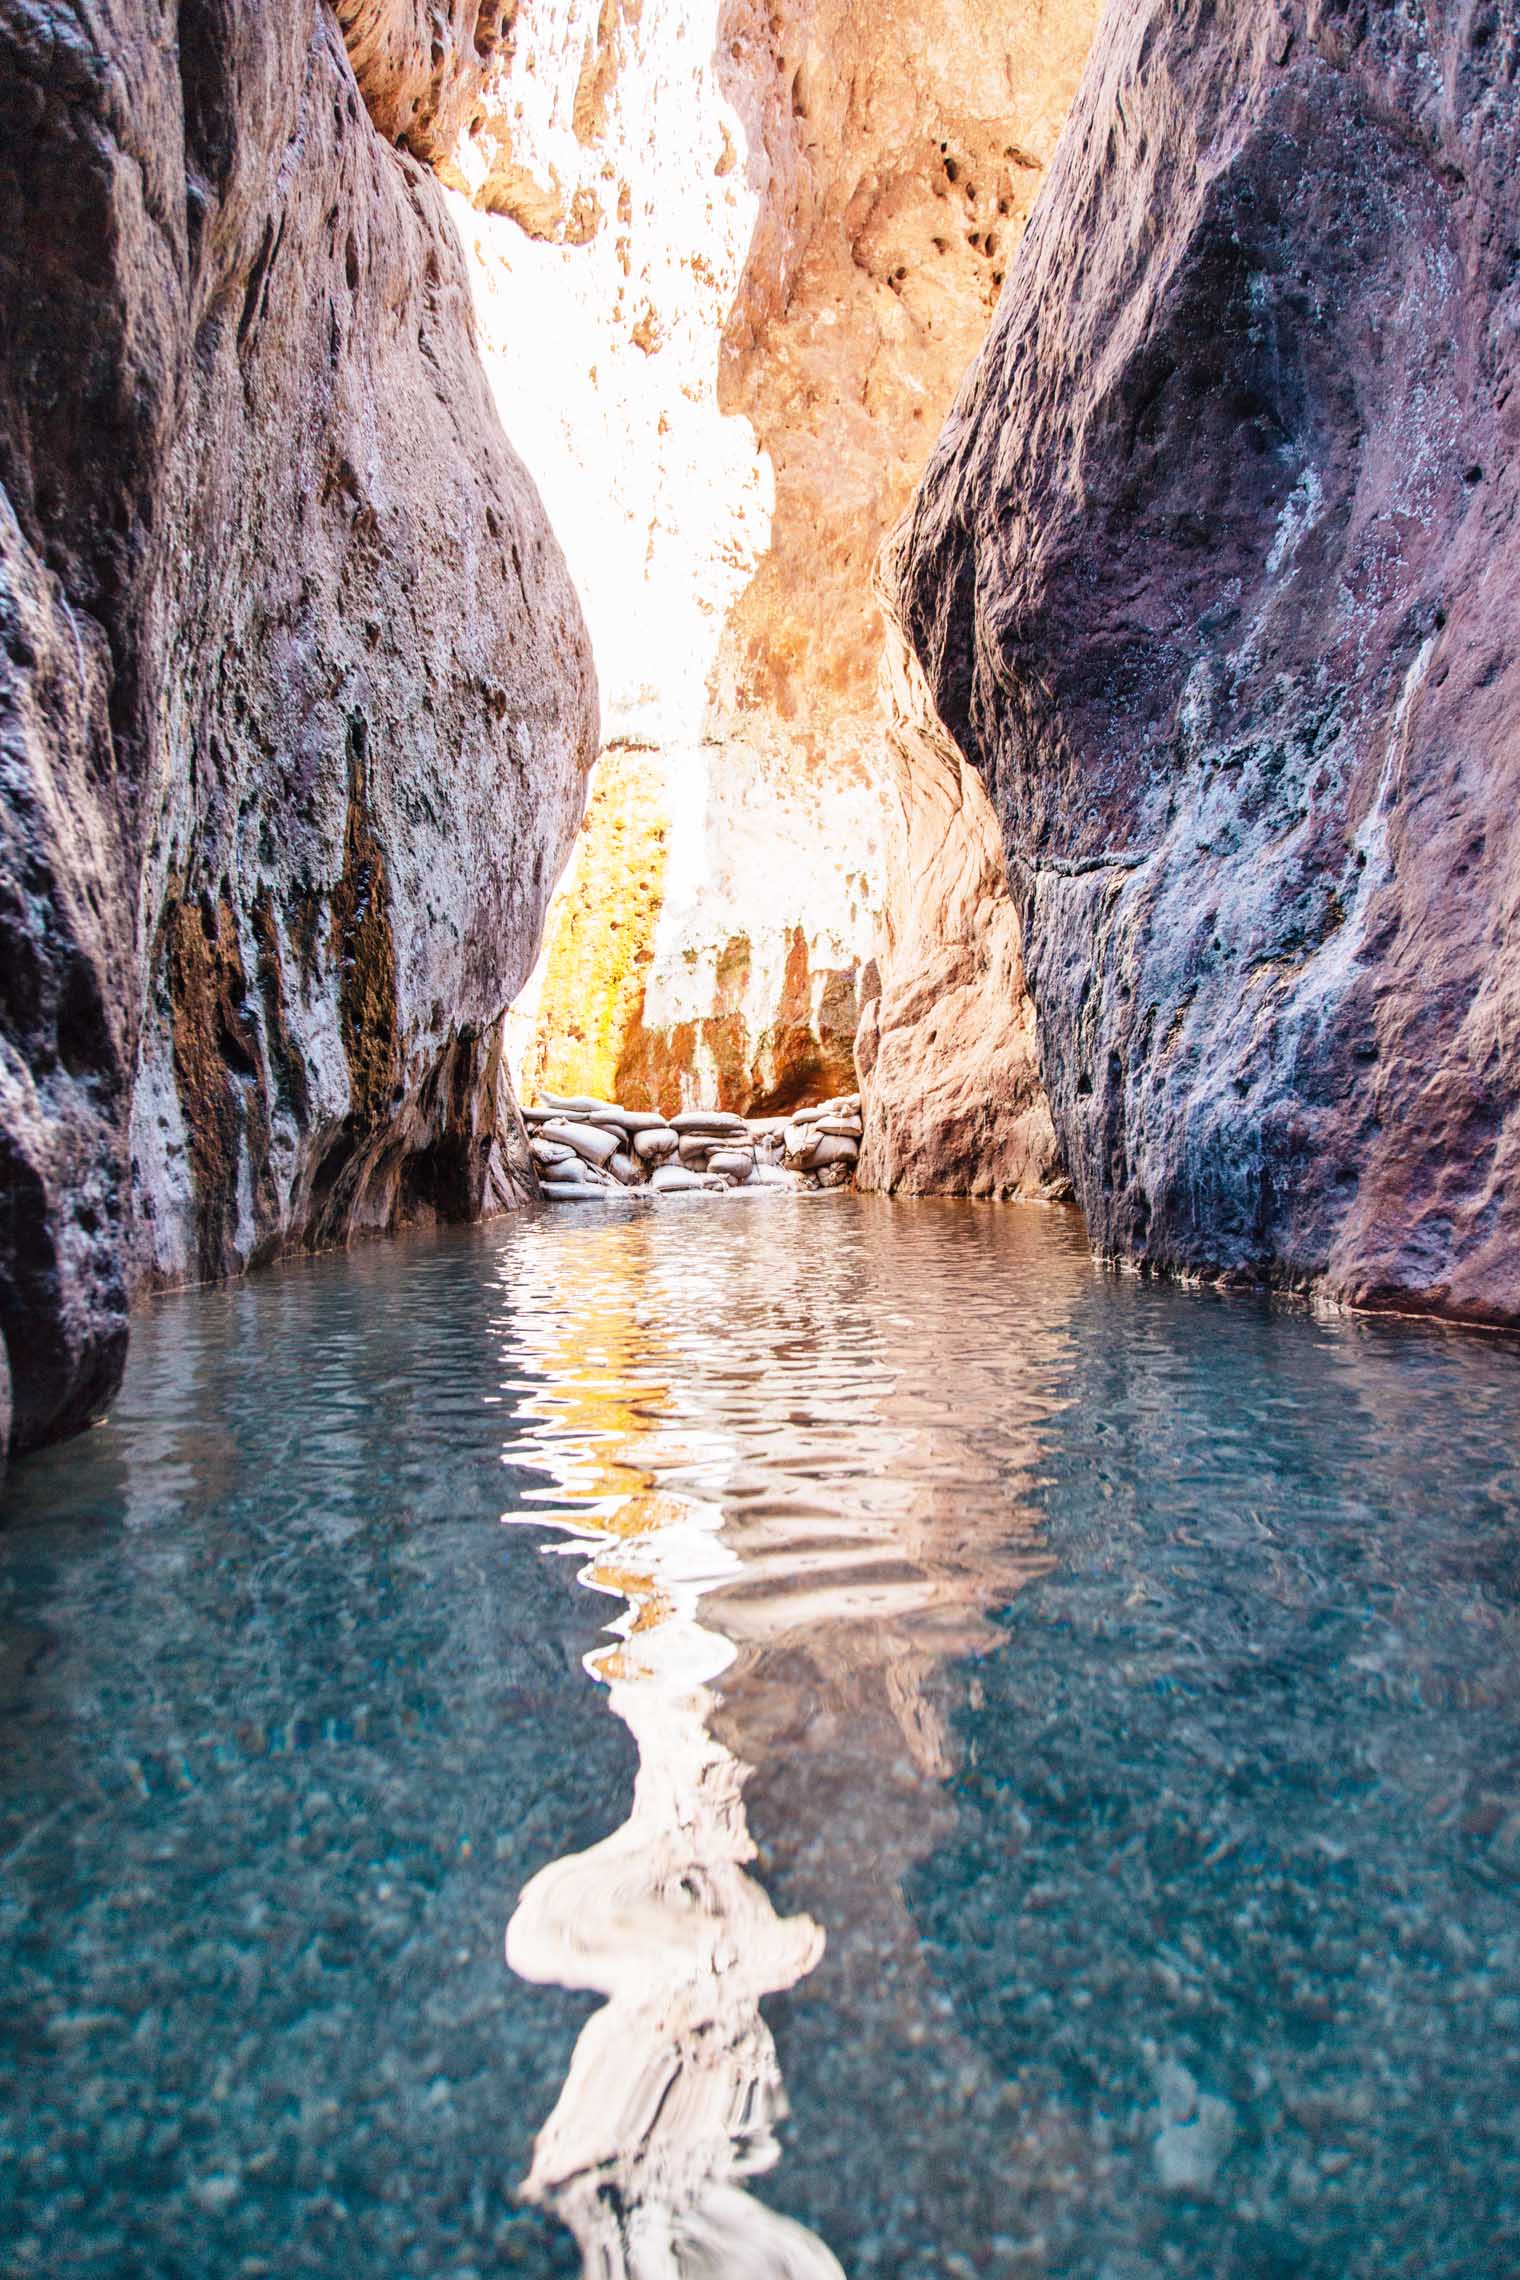 Hot spring in a slot canyon